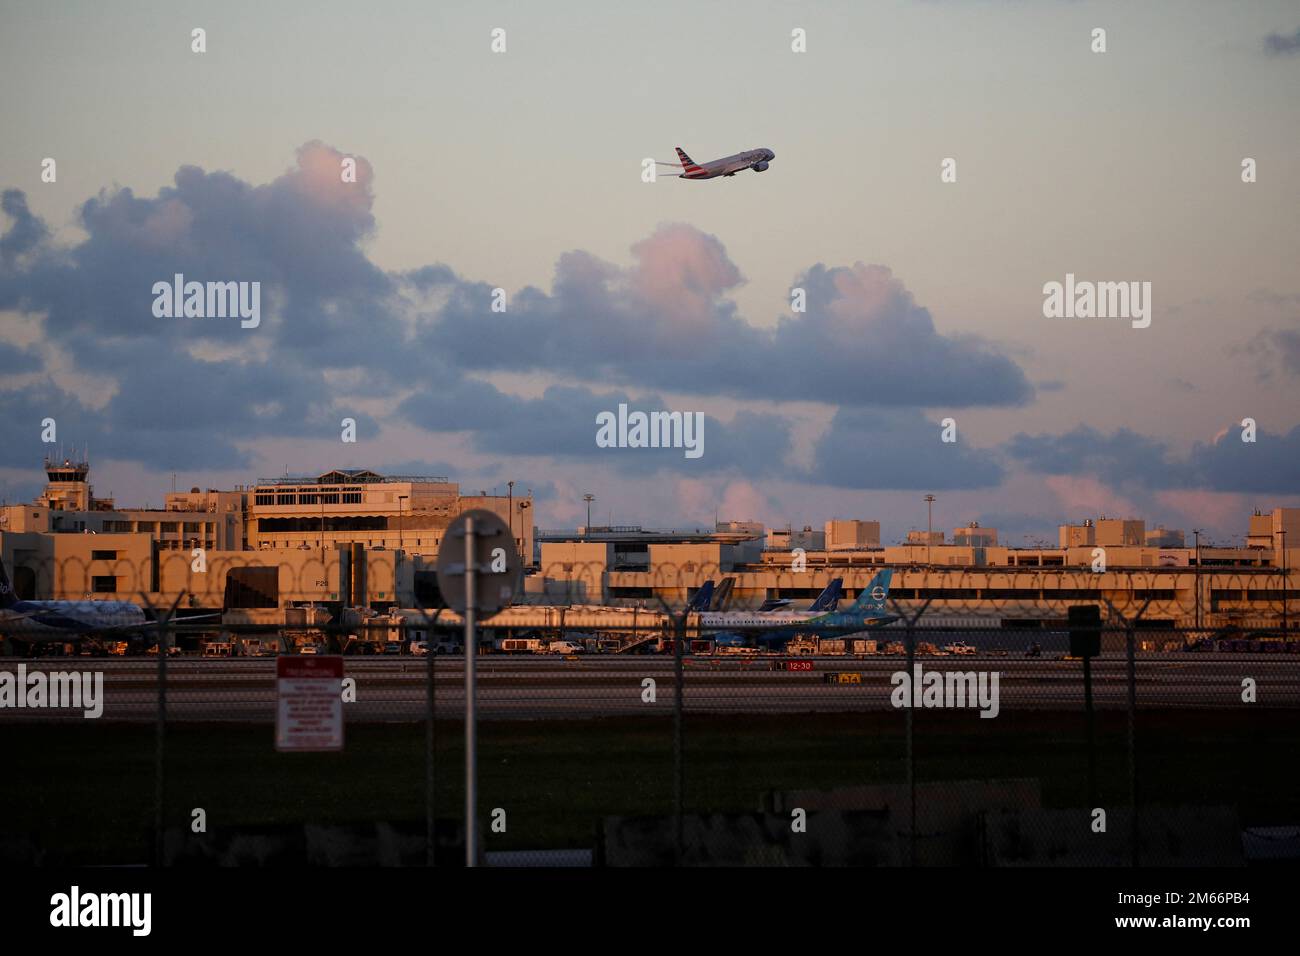 An American Airlines plane takes off from Miami International Airport after  the Federal Aviation Administration (FAA) said it had slowed the volume of  airplane traffic over Florida due to an air traffic